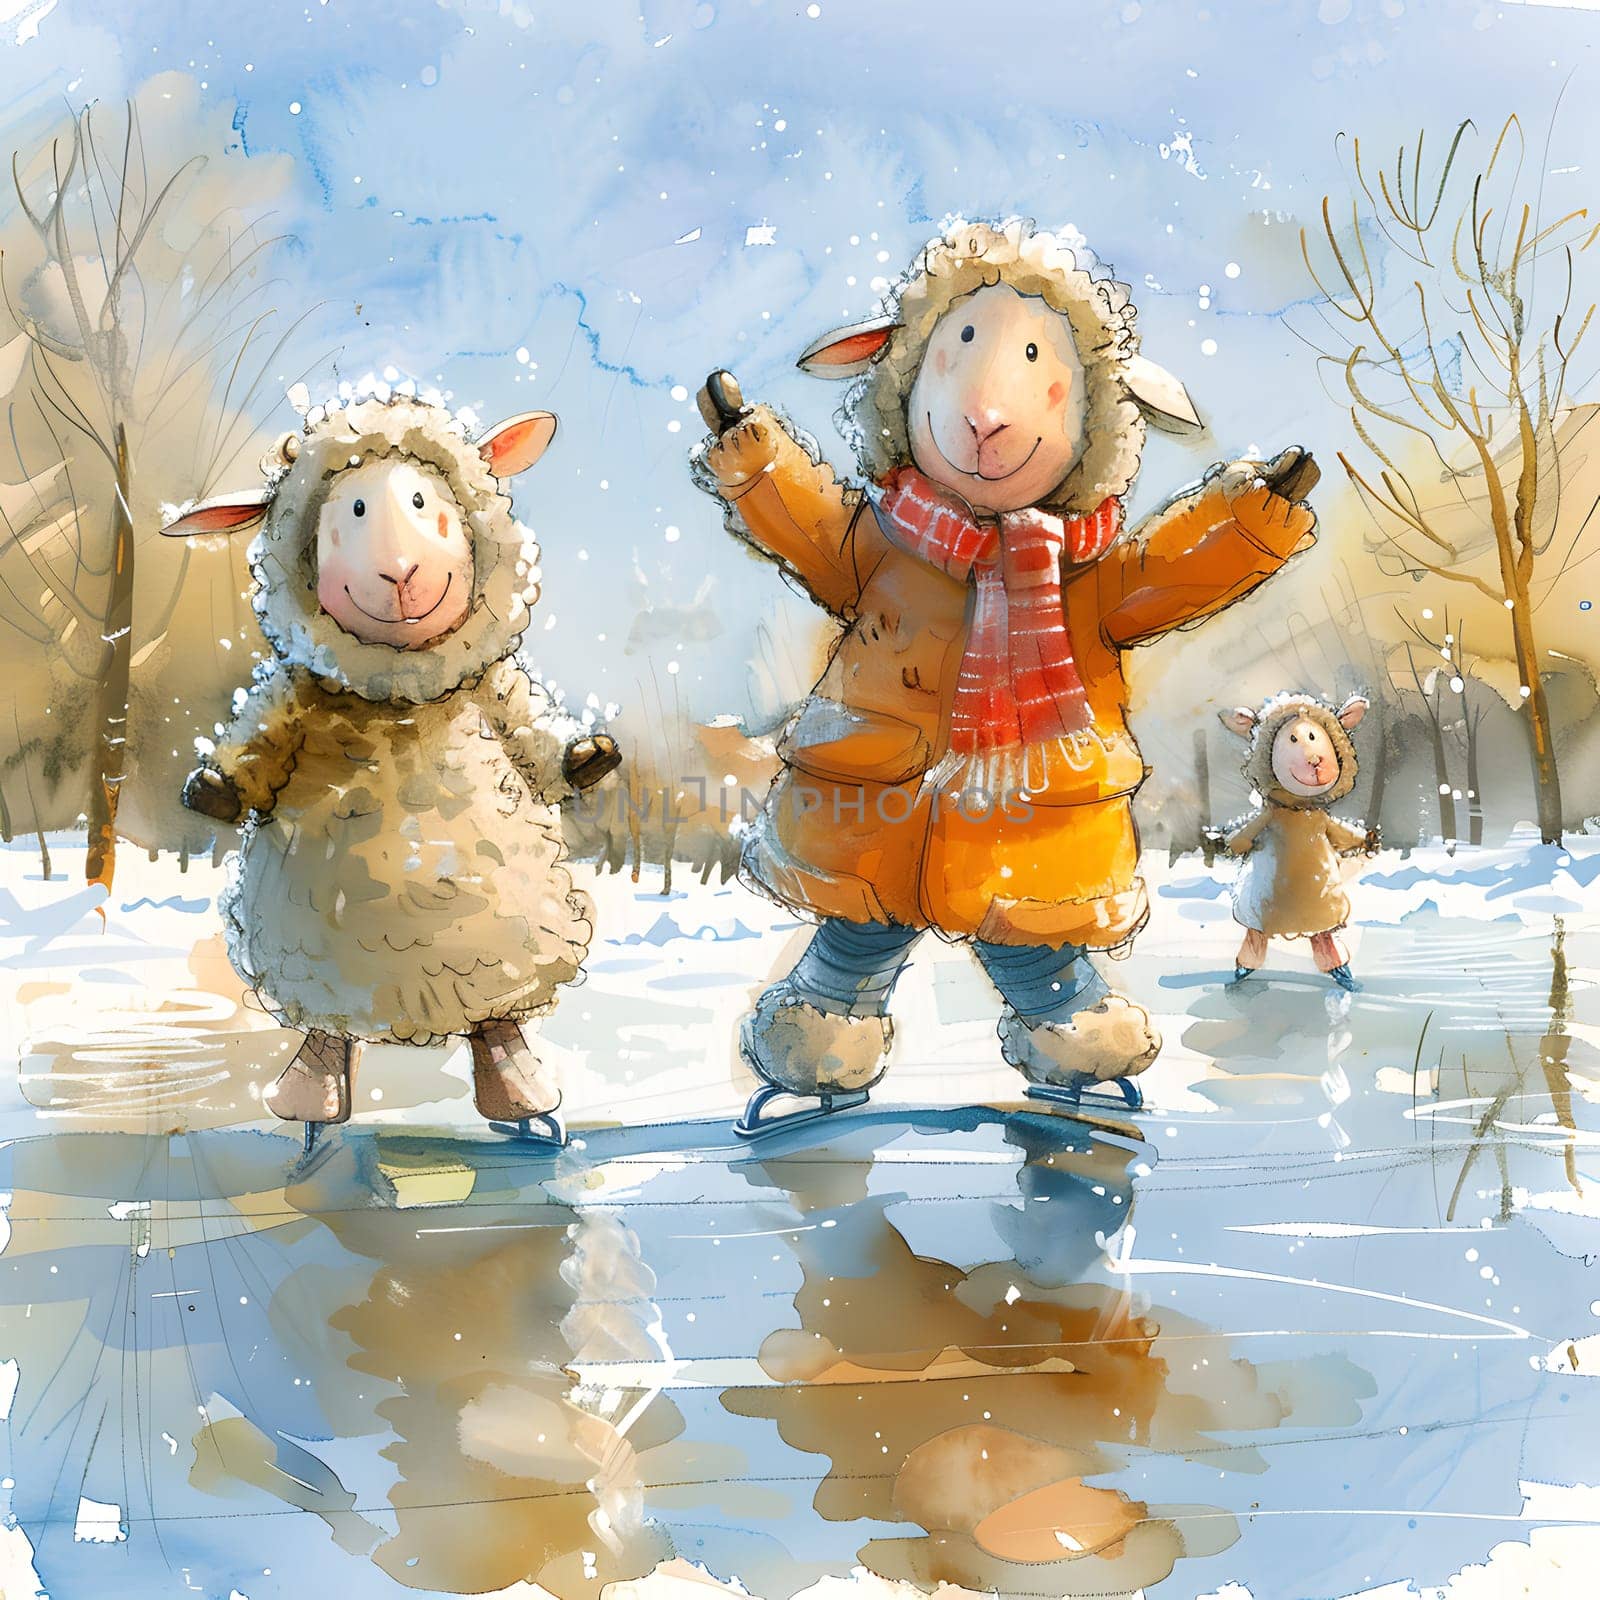 Two sheep are happily ice skating on frozen water in a snowy landscape, their movements graceful and fluid as they glide under the sky filled with fluffy clouds